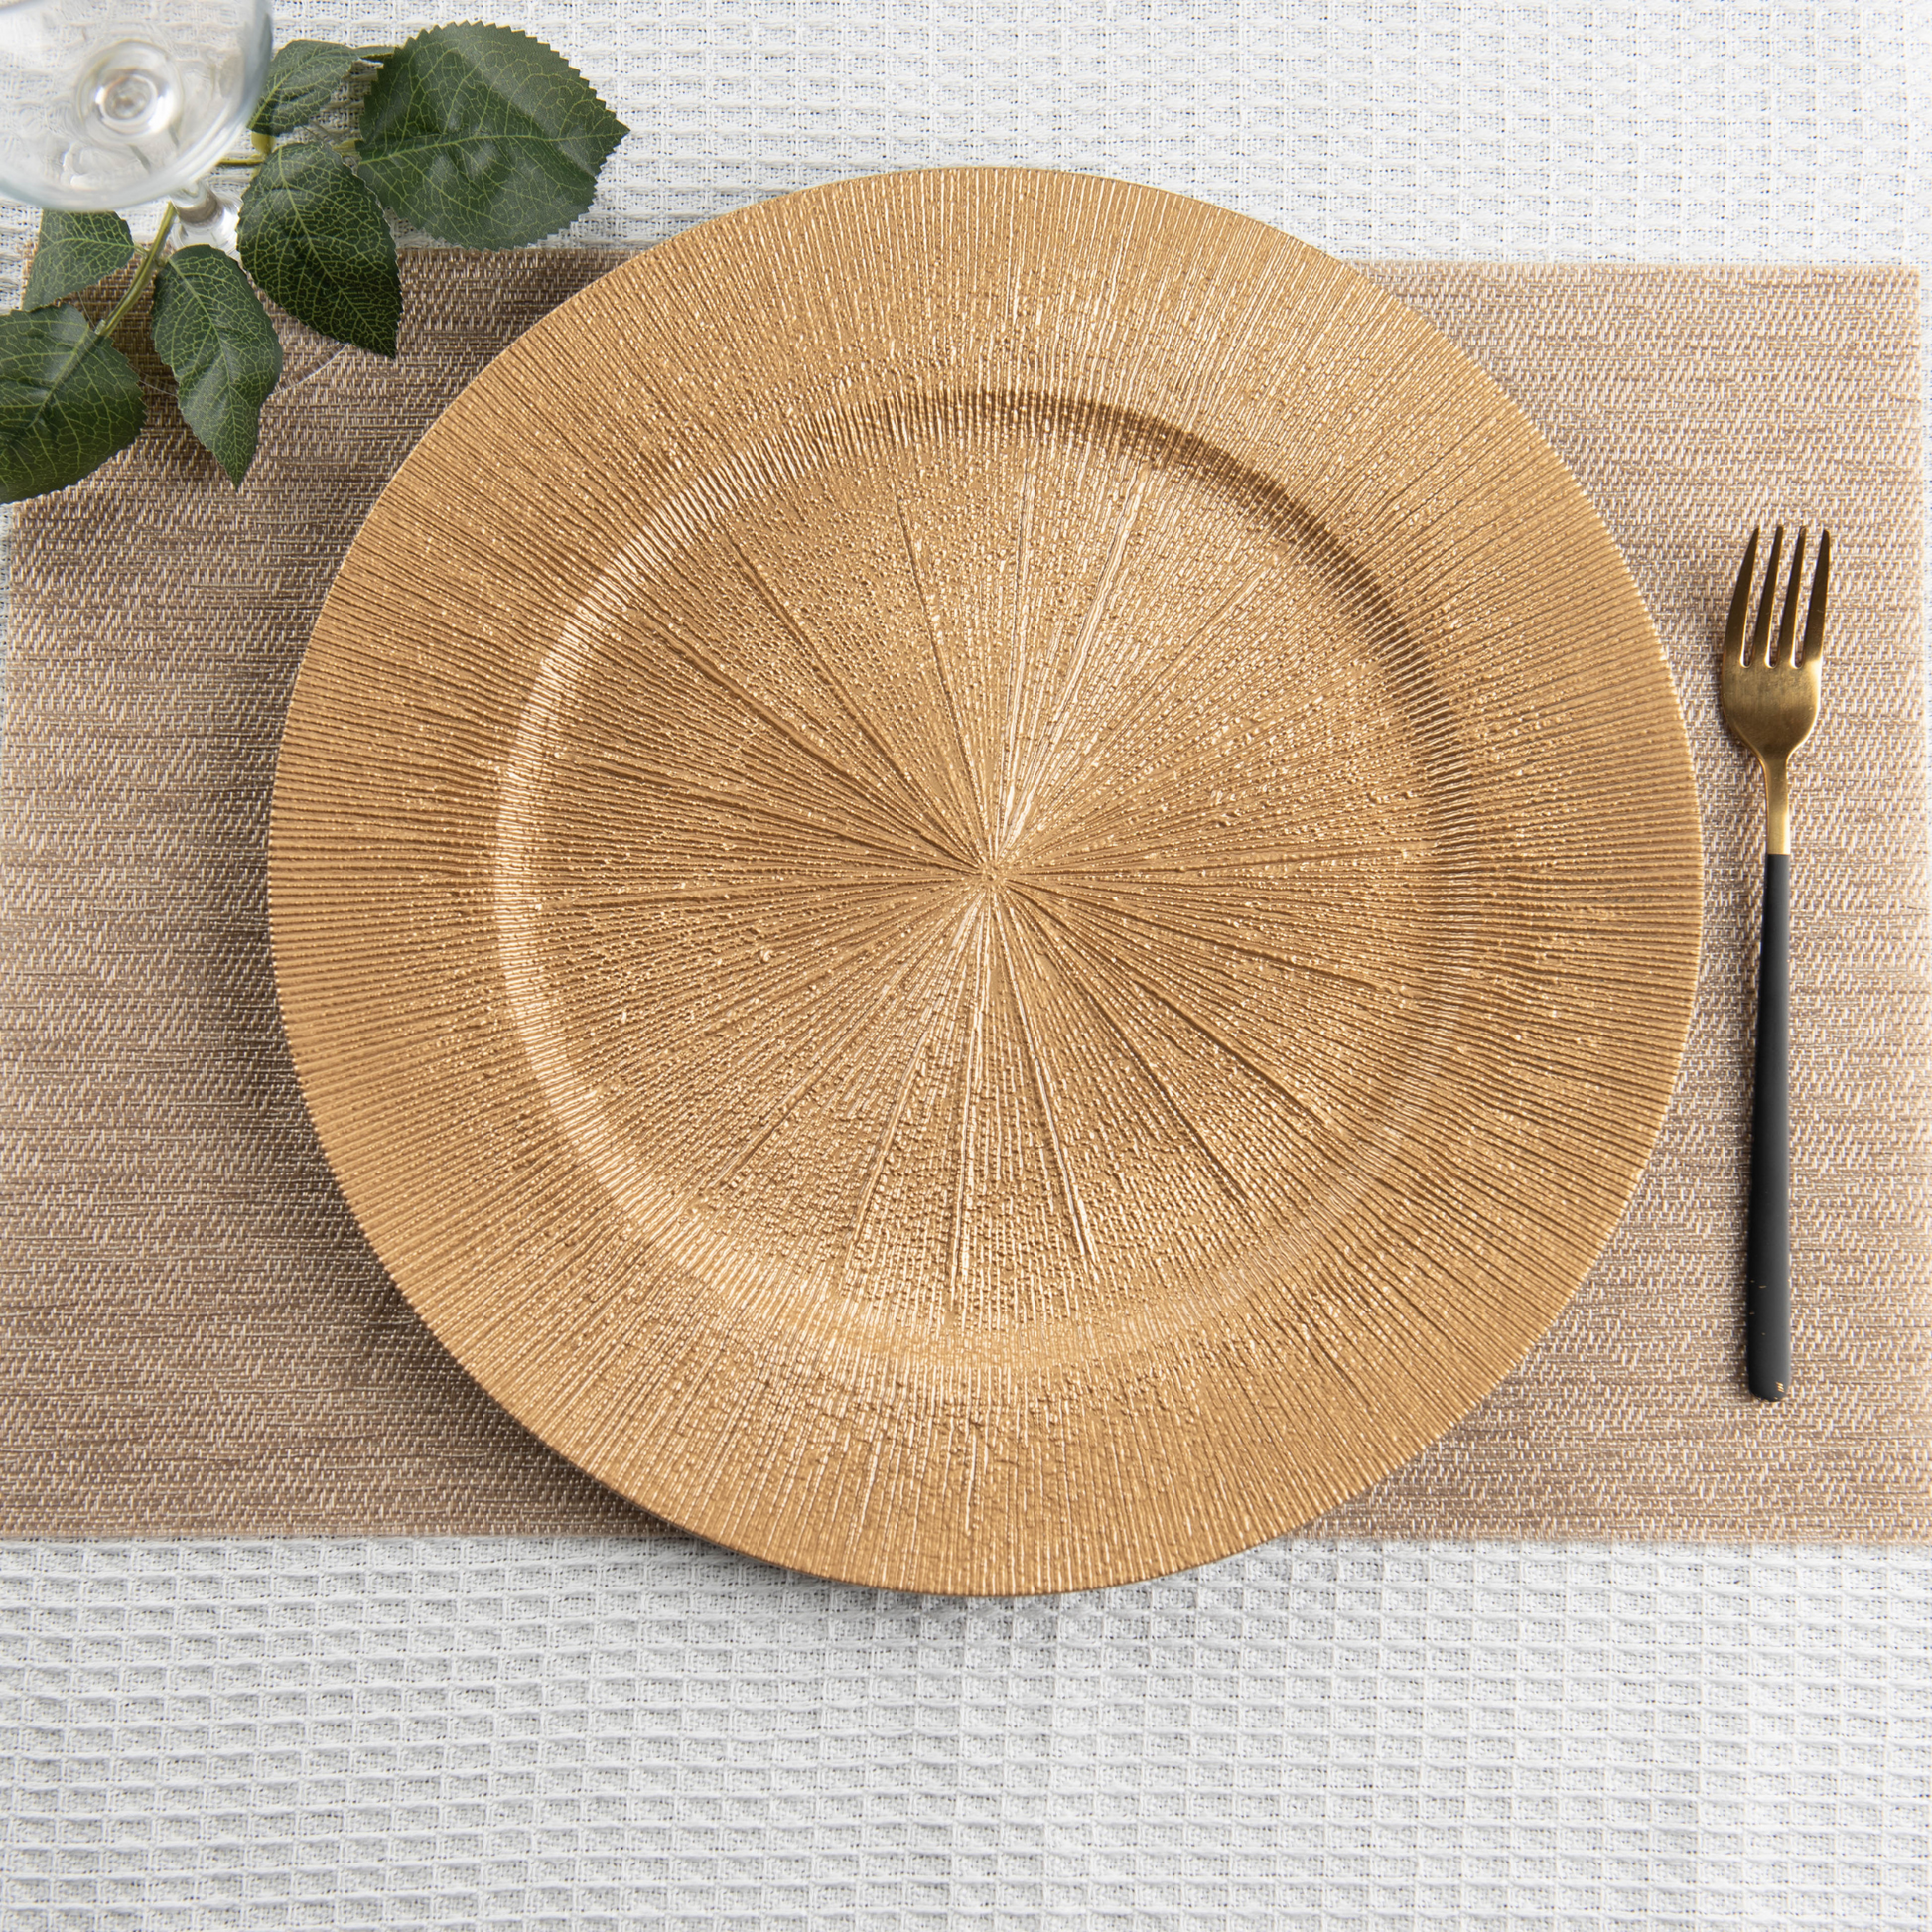 Sunray Acrylic Charger Plate - Gold